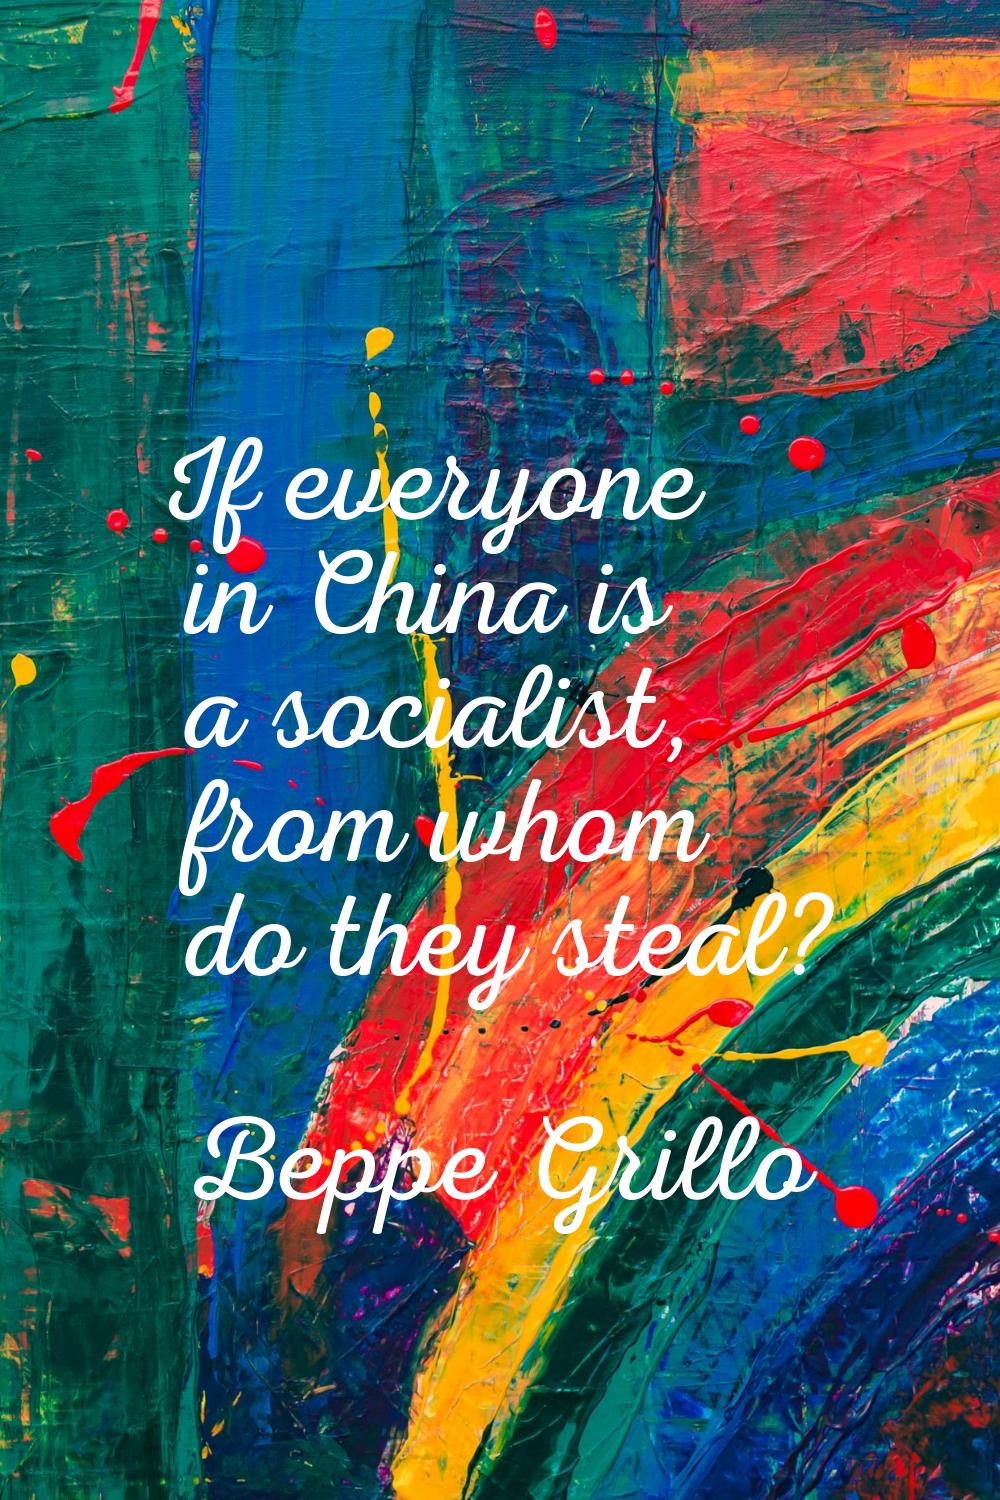 If everyone in China is a socialist, from whom do they steal?